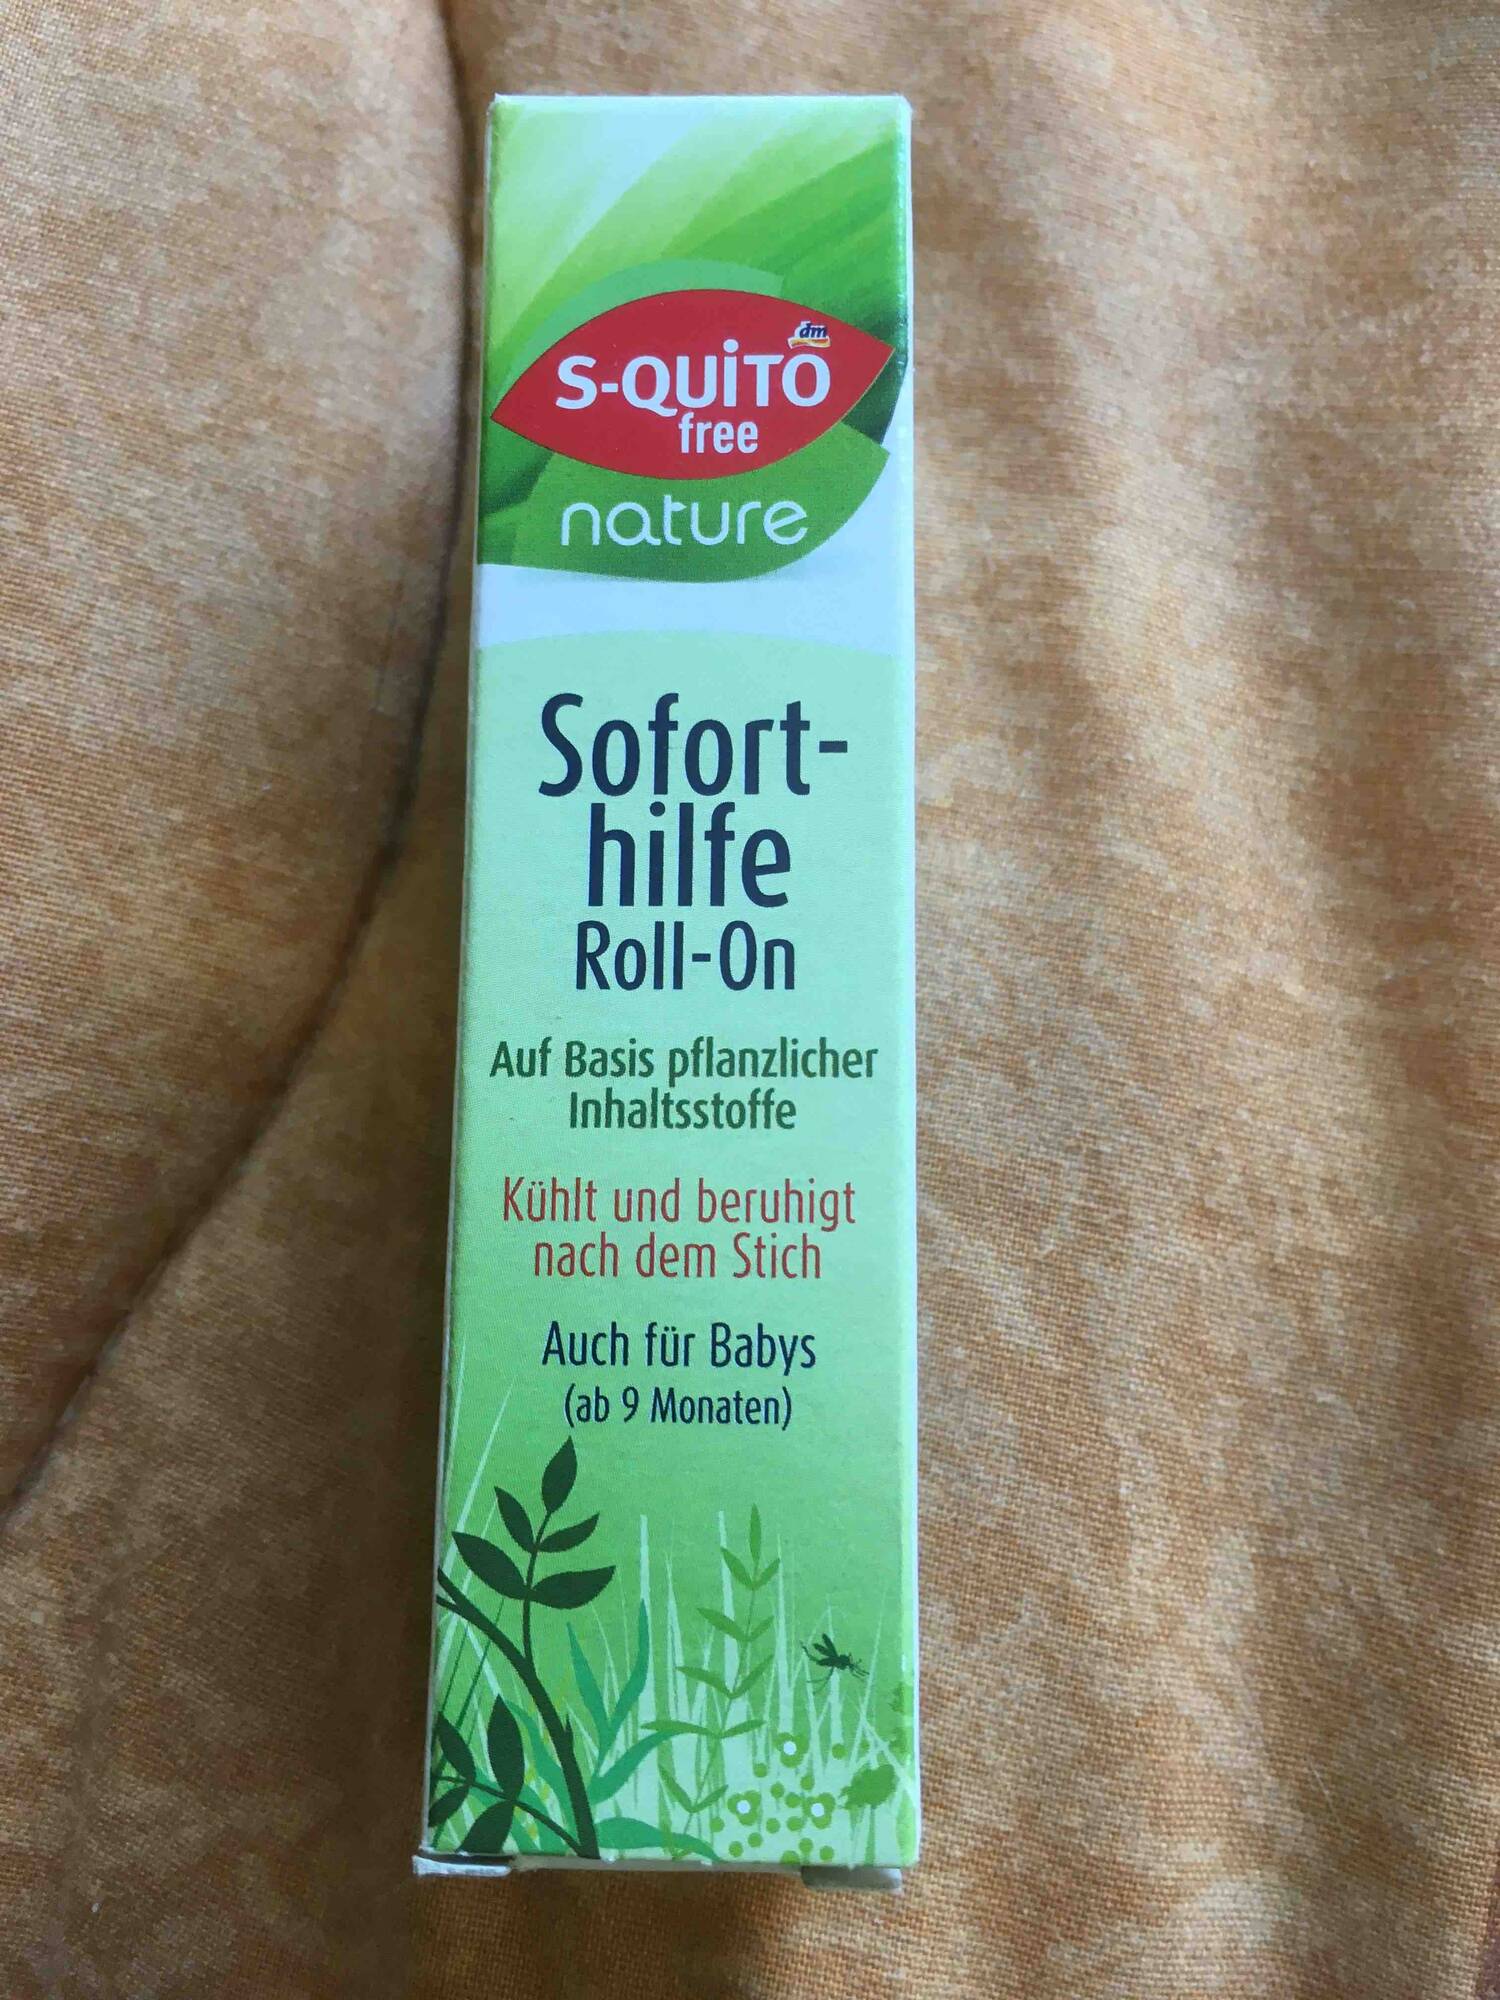 S-QUITOFREE - Soforthilfe roll-on nature